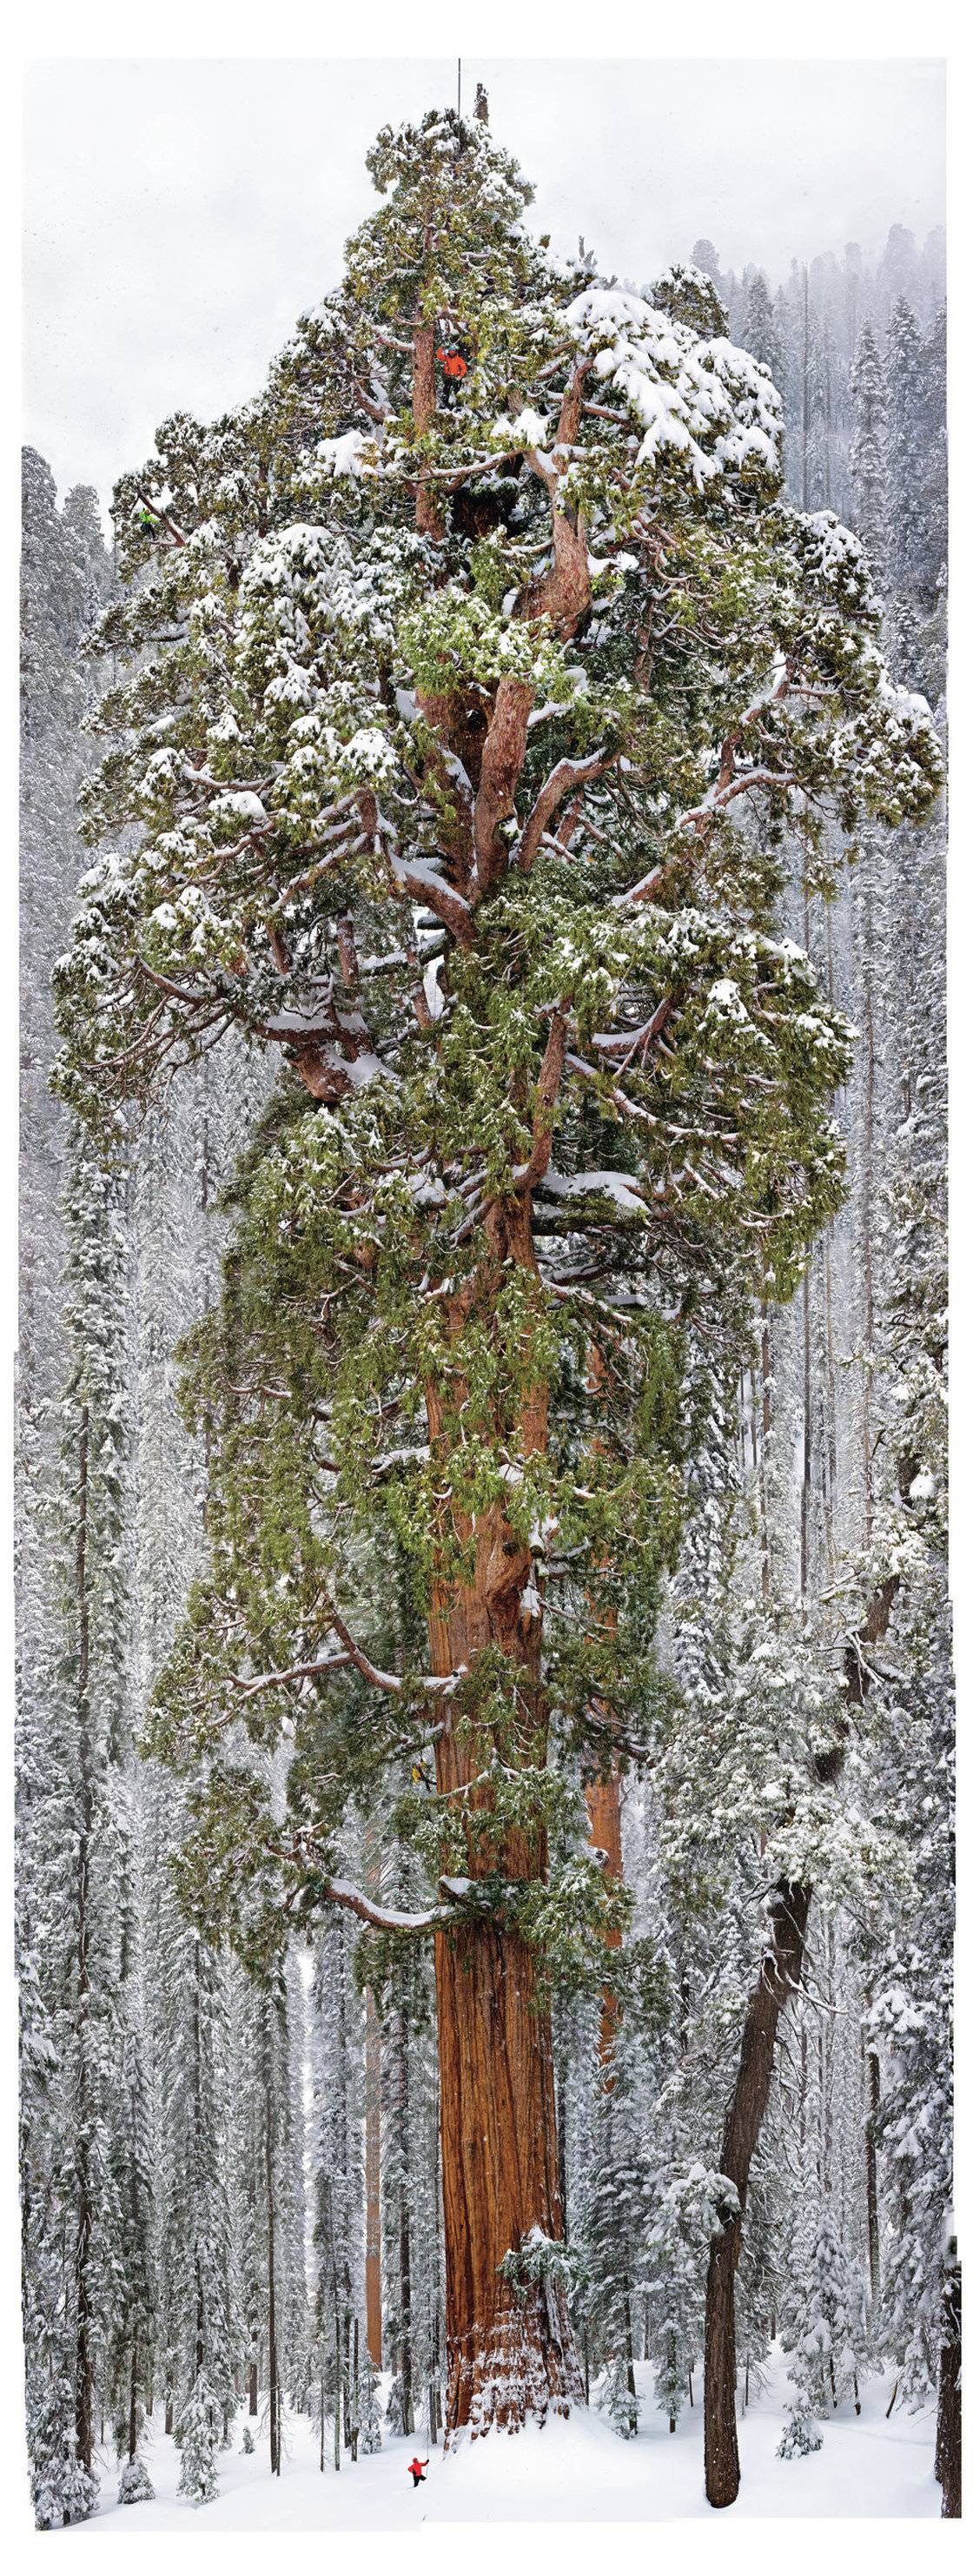 3_200_year_old_tree_in_the_sequoia_national_park.jpg